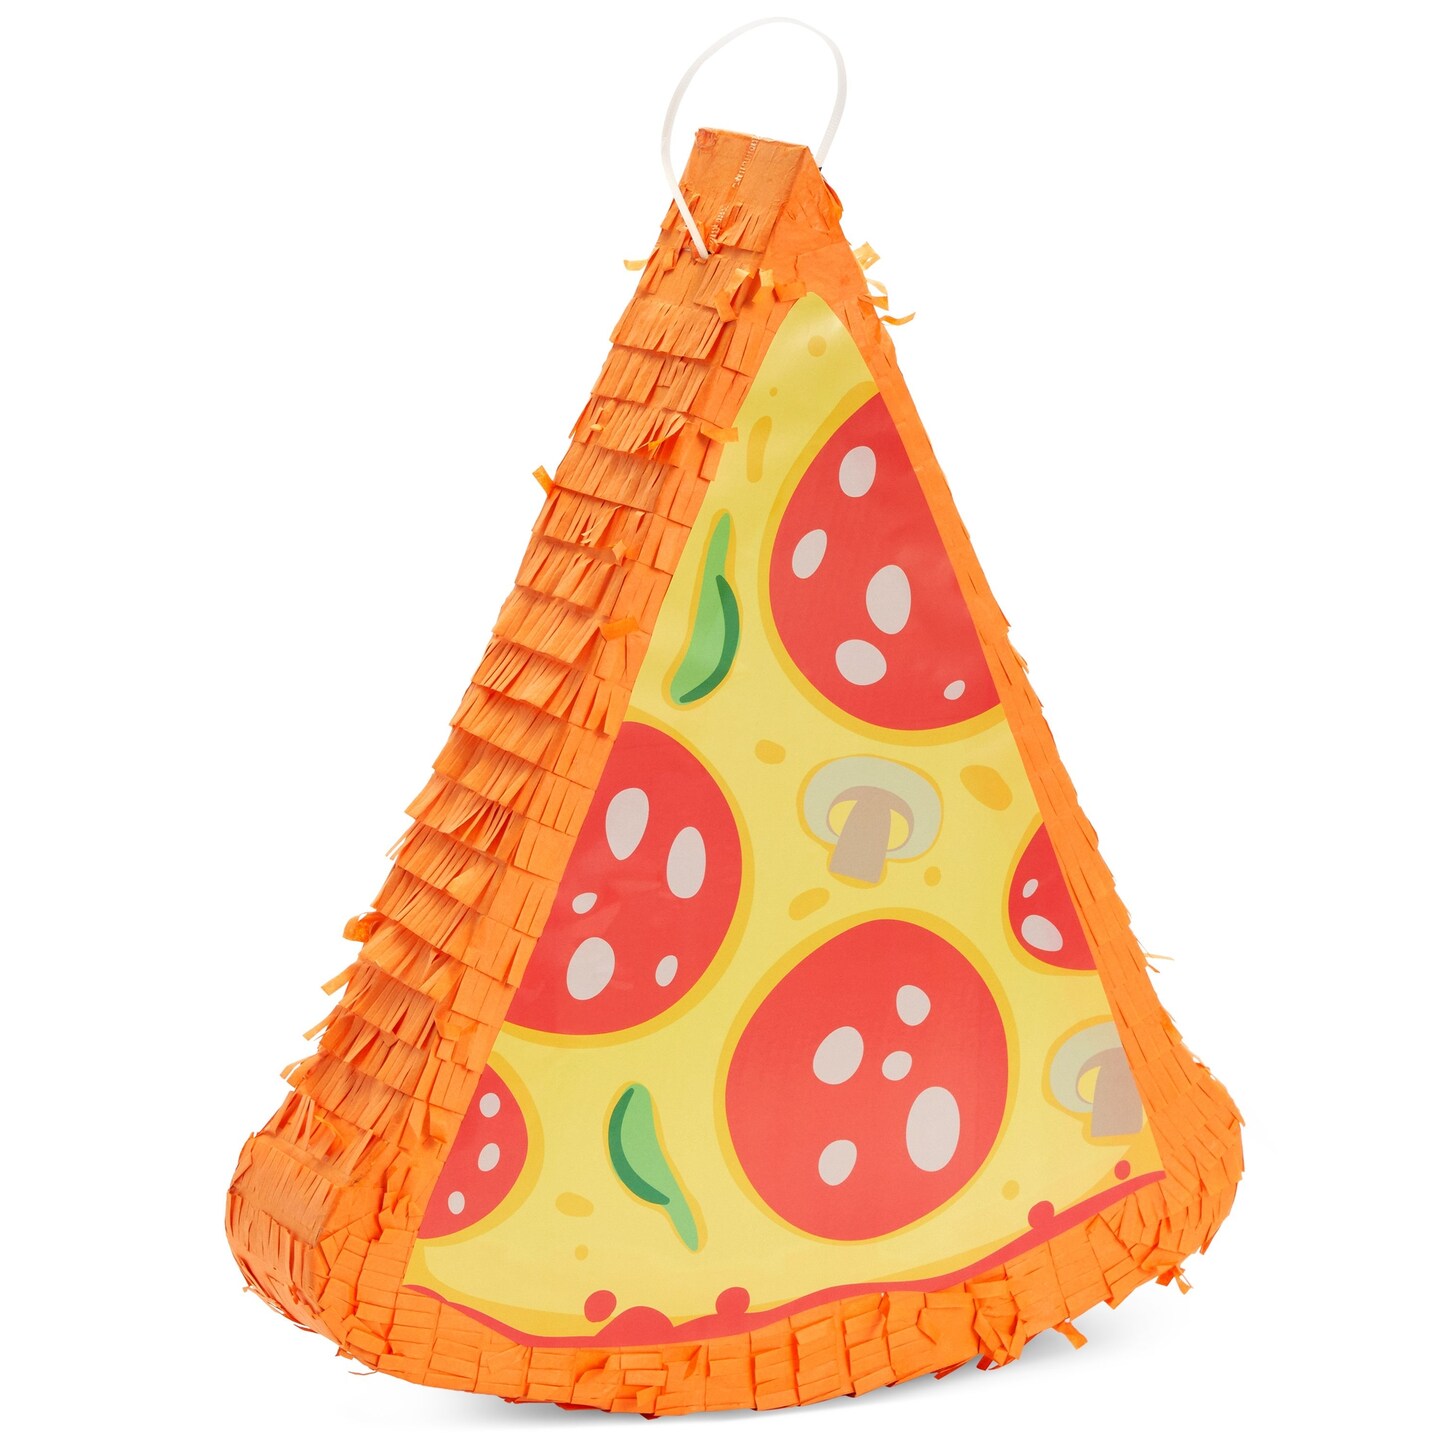 Pizza Pinata - Food Themed Birthday Party Decorations, Table Centerpiece (Small, 16.5 x 13.5 x 3 in)